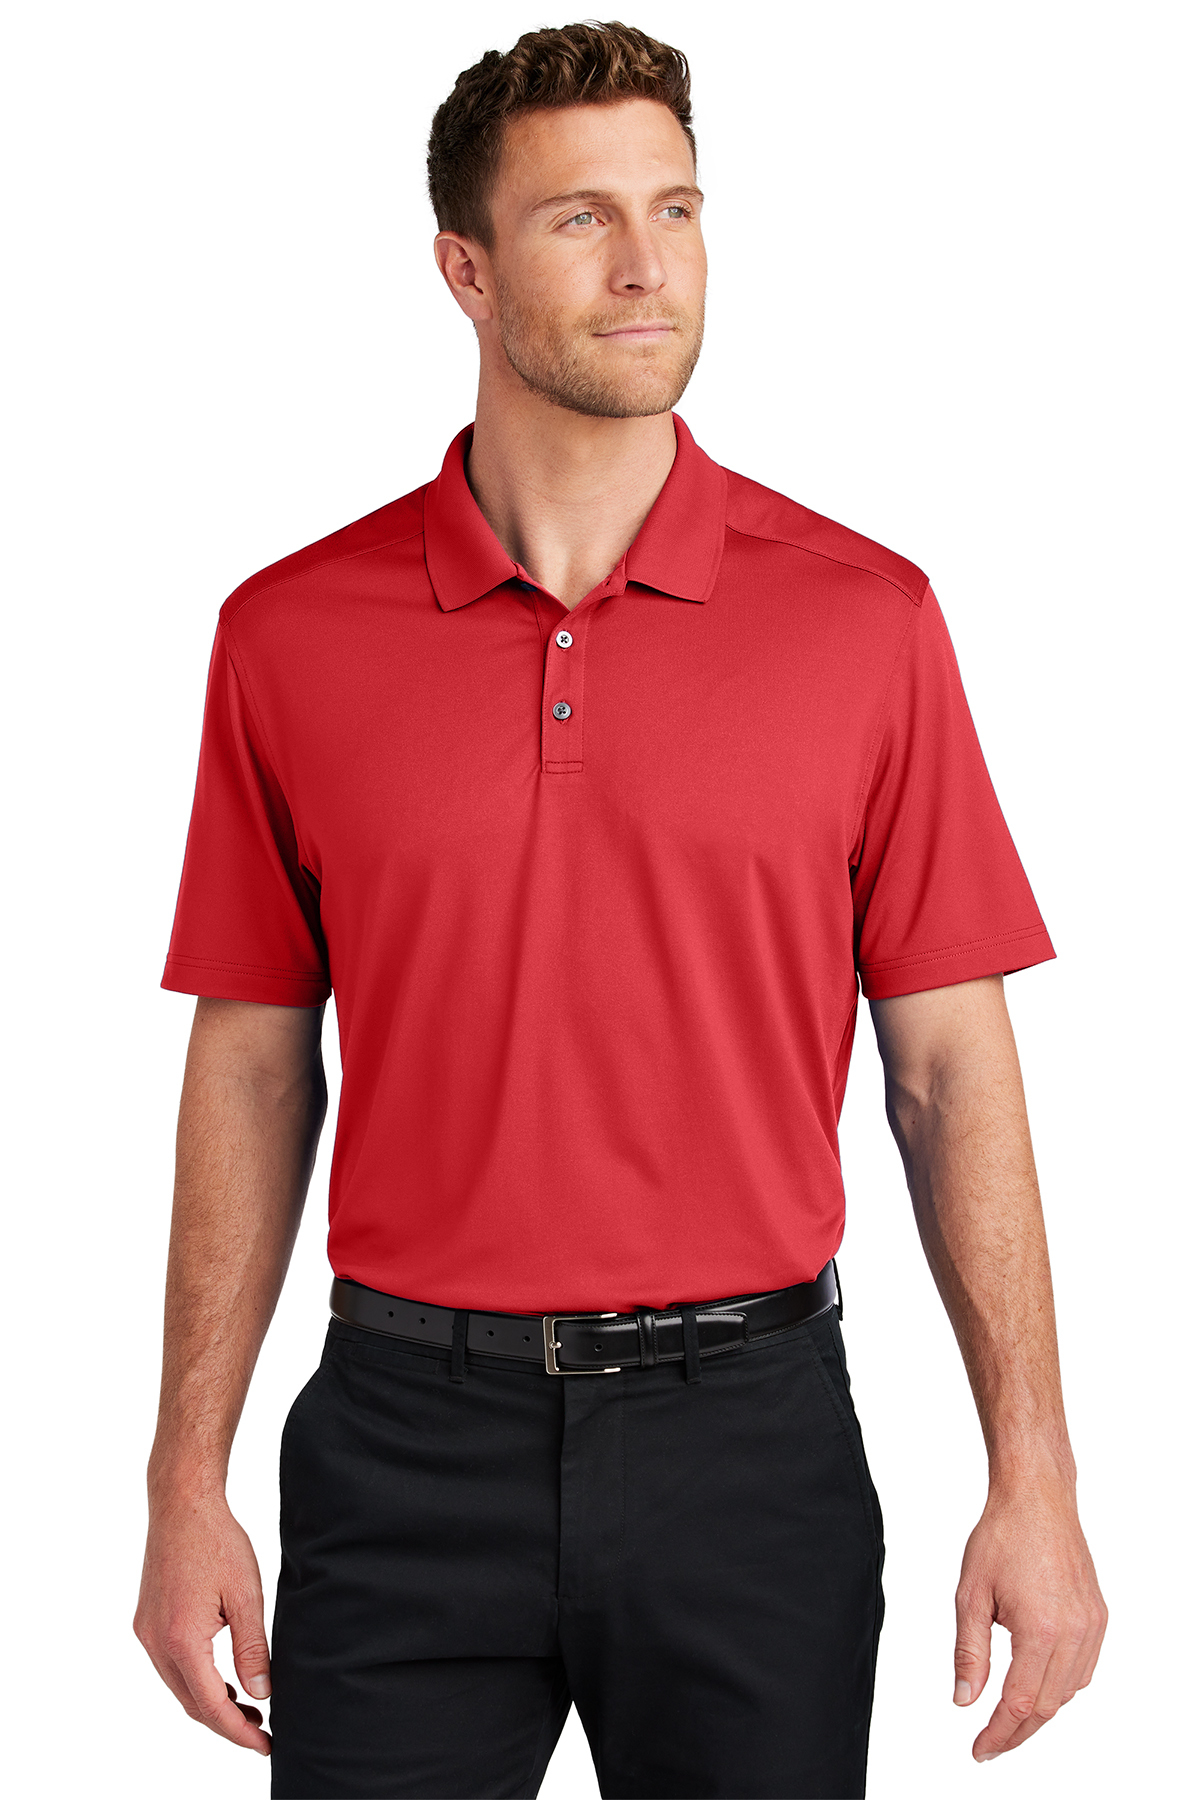 Port Authority City Stretch Flat Knit Polo | Product | Port Authority